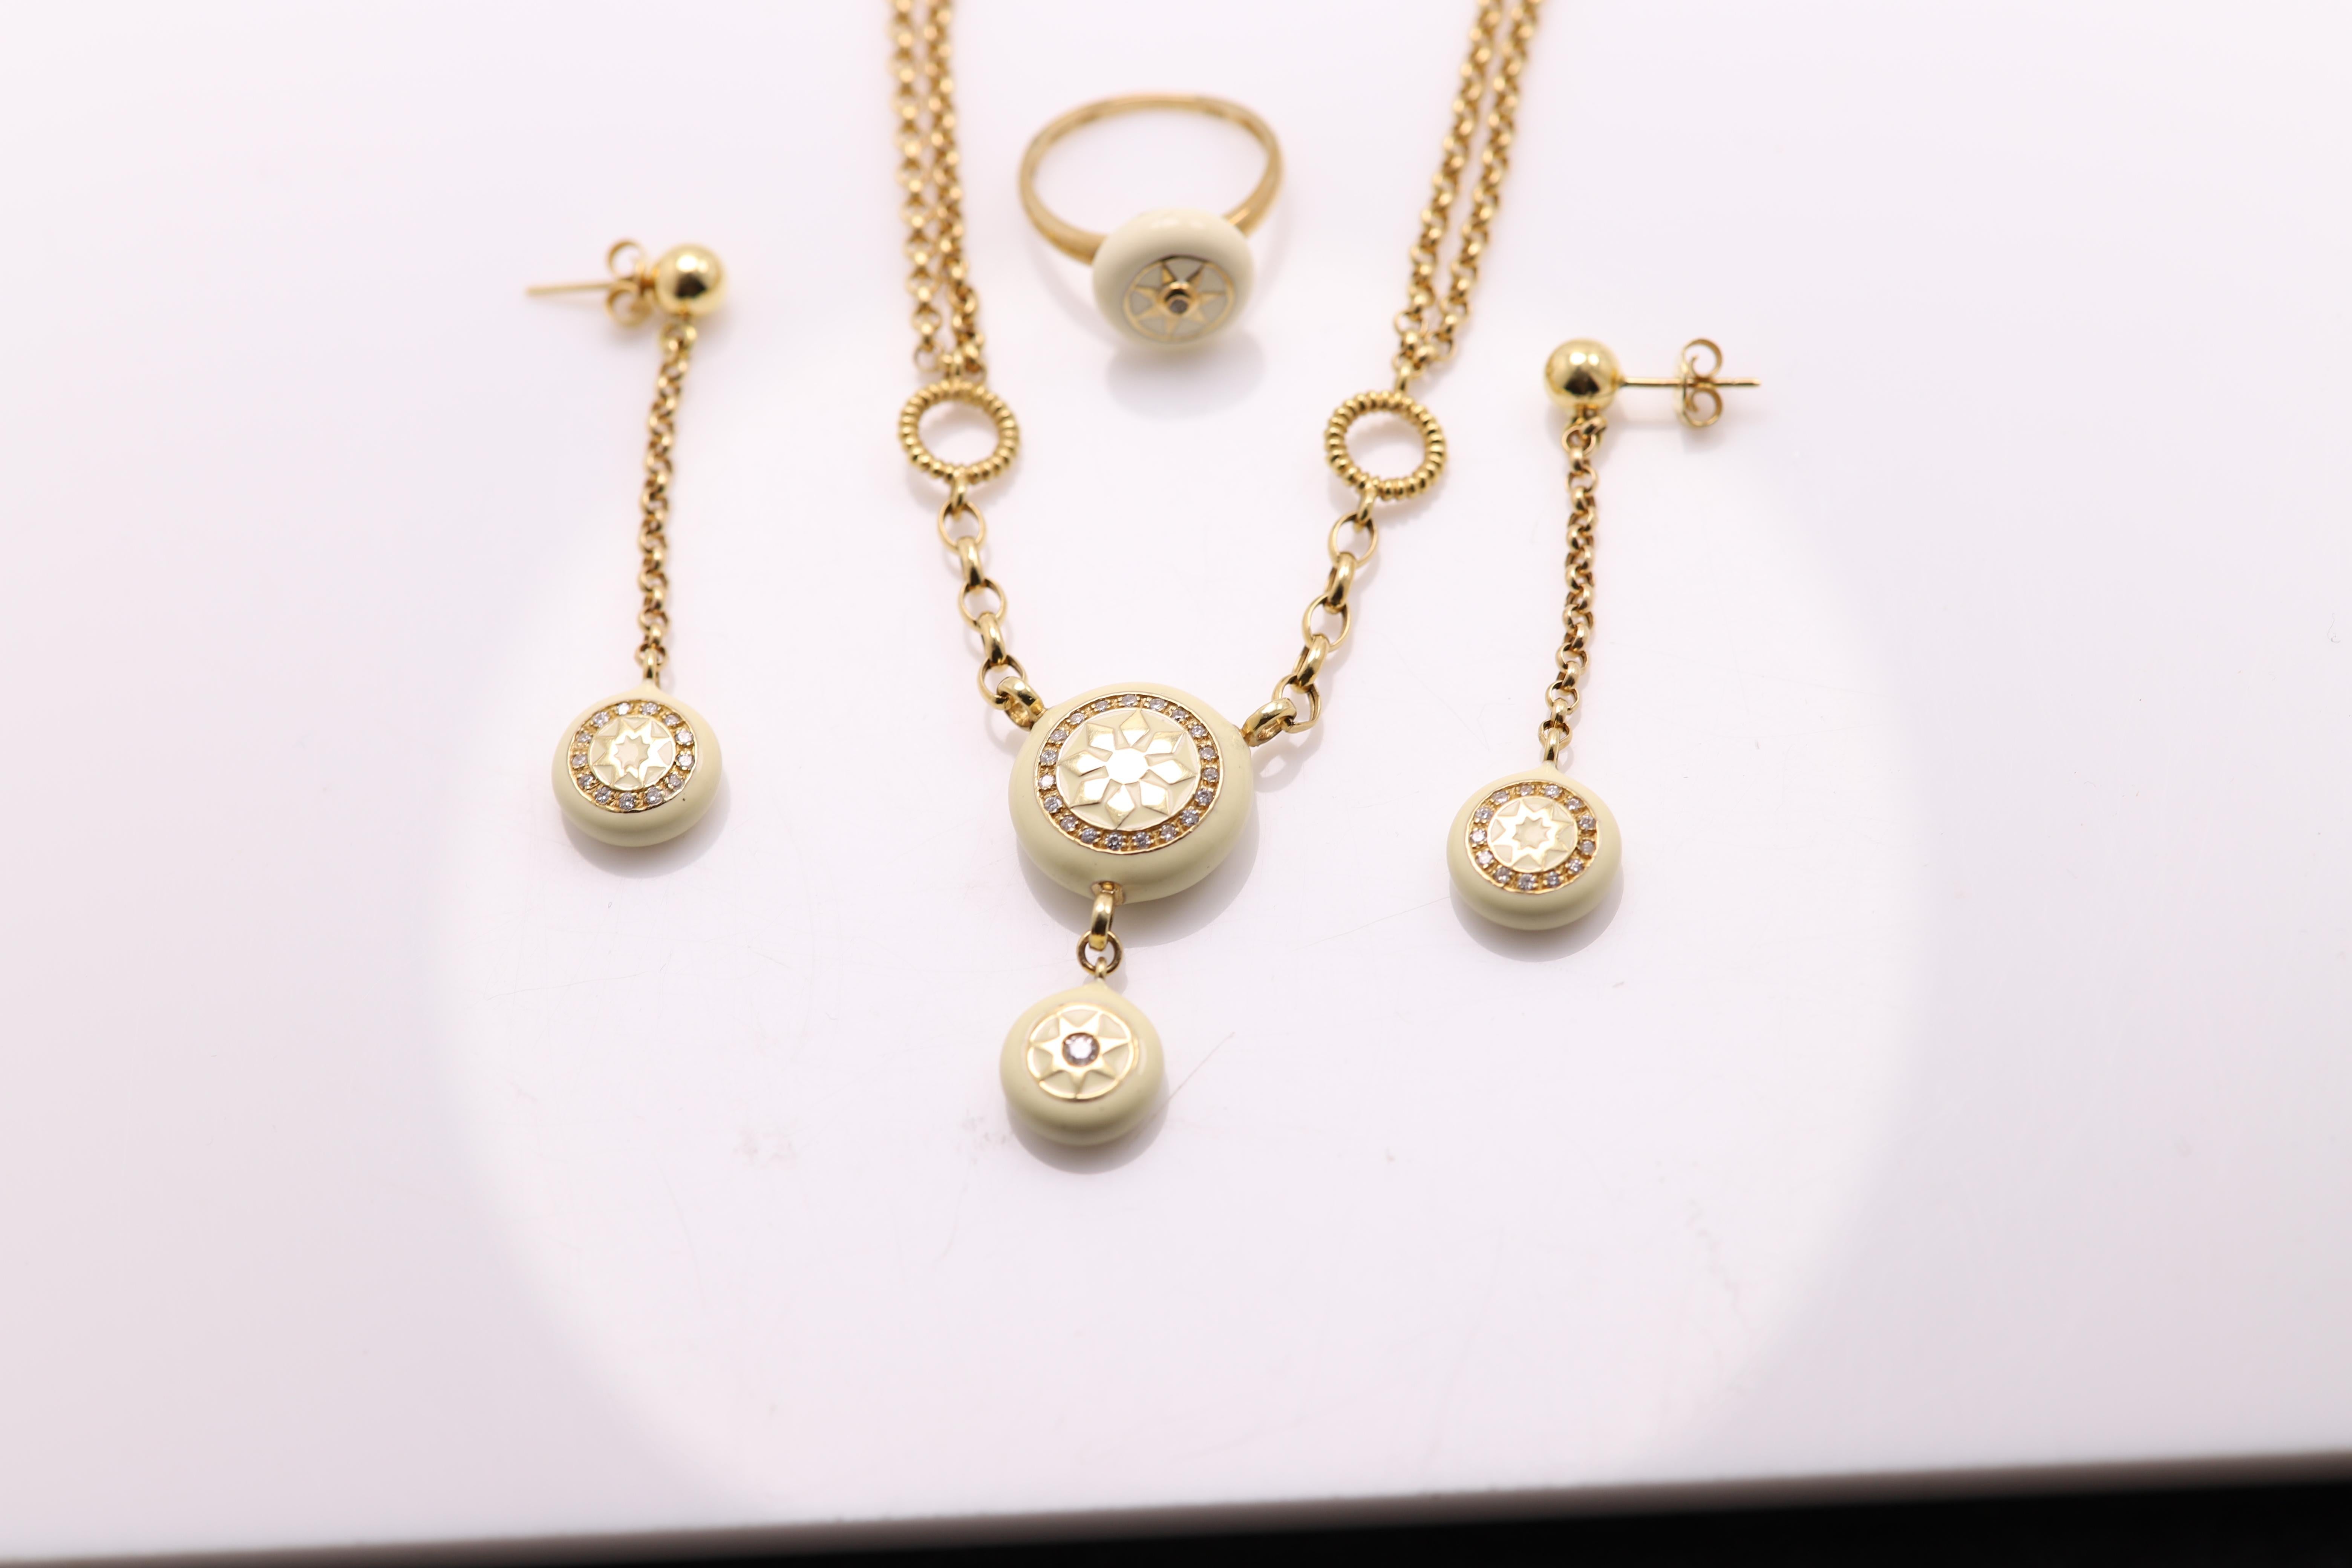 New lovely jewelry set 
14k yellow gold
Natural Diamonds total 0.55 carat G-SI 
Enamel Color is white-ish a bit off-white 
made in italy
the earrings are 2' Inch long
The Ring is size 7.5 
the Necklace is 15' Inch Long
can be adjusted according to